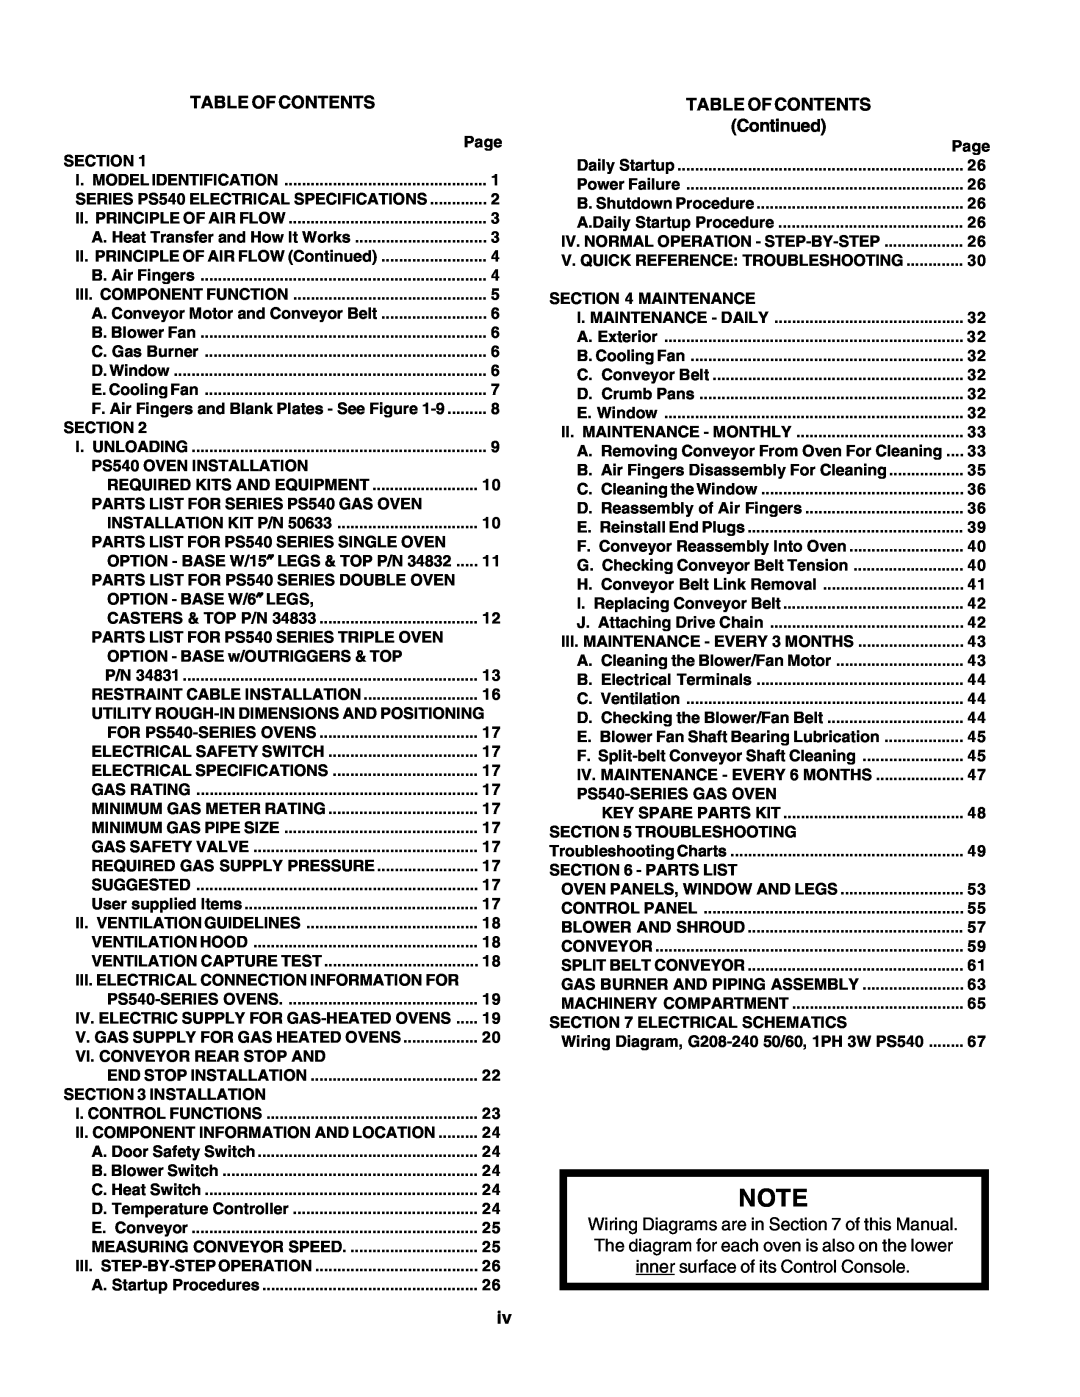 Middleby Marshall PS540G installation manual Table Of Contents, Continued 